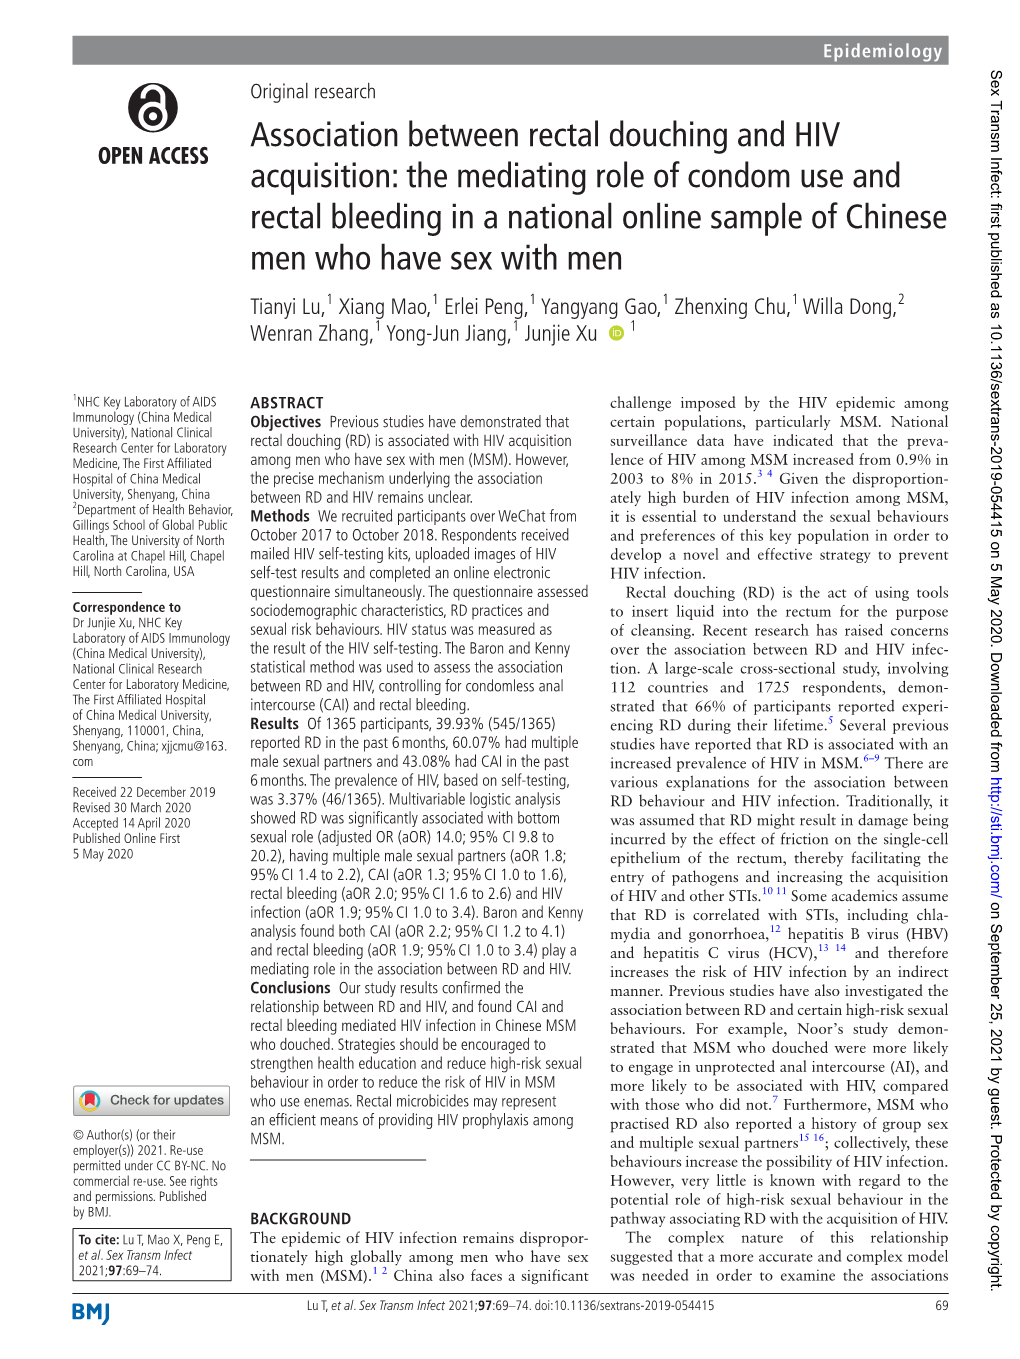 The Mediating Role of Condom Use and Rectal Bleeding in a National Onli